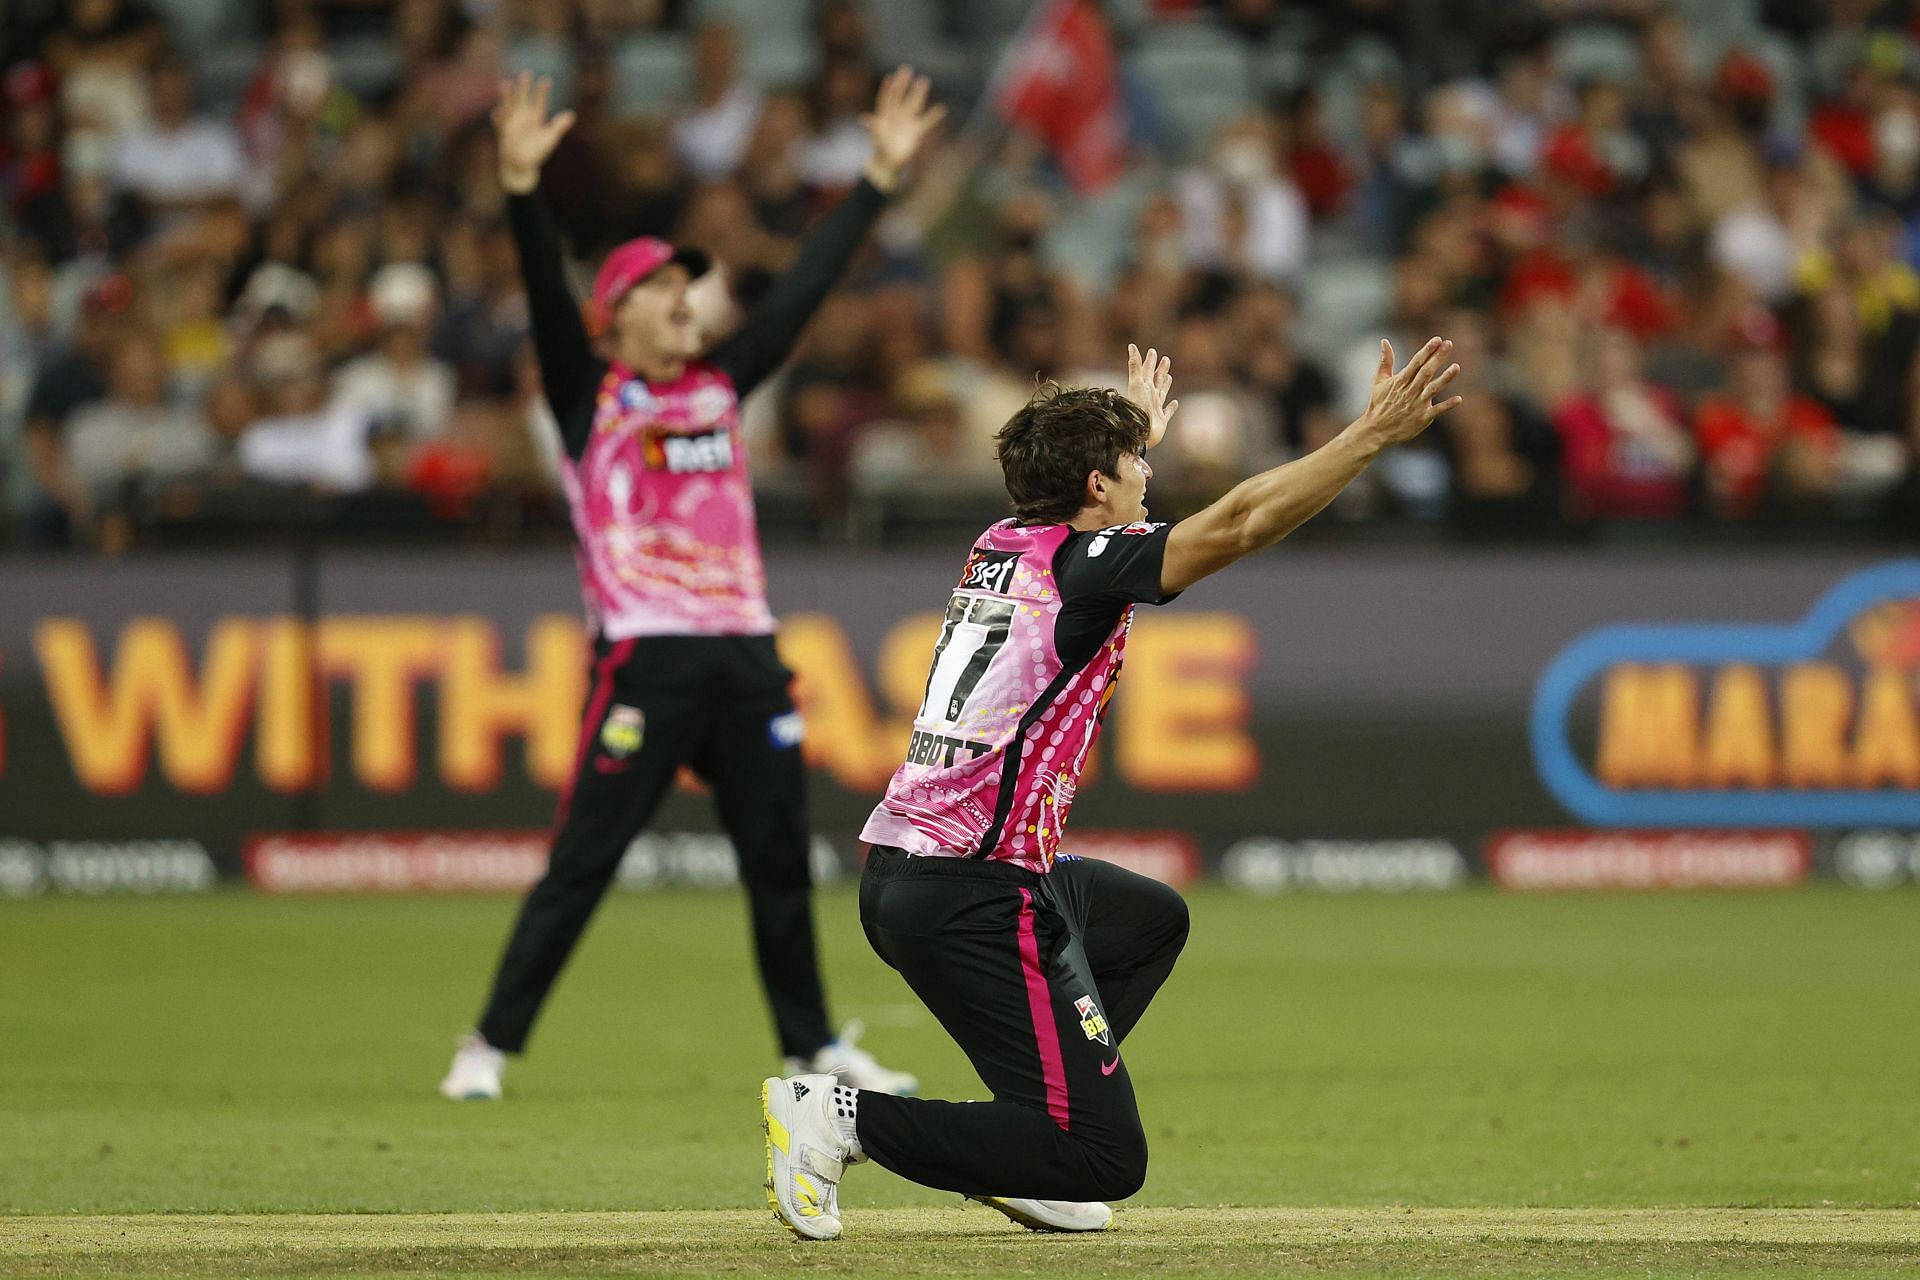 Sydney Sixers have looked strong as usual in this season